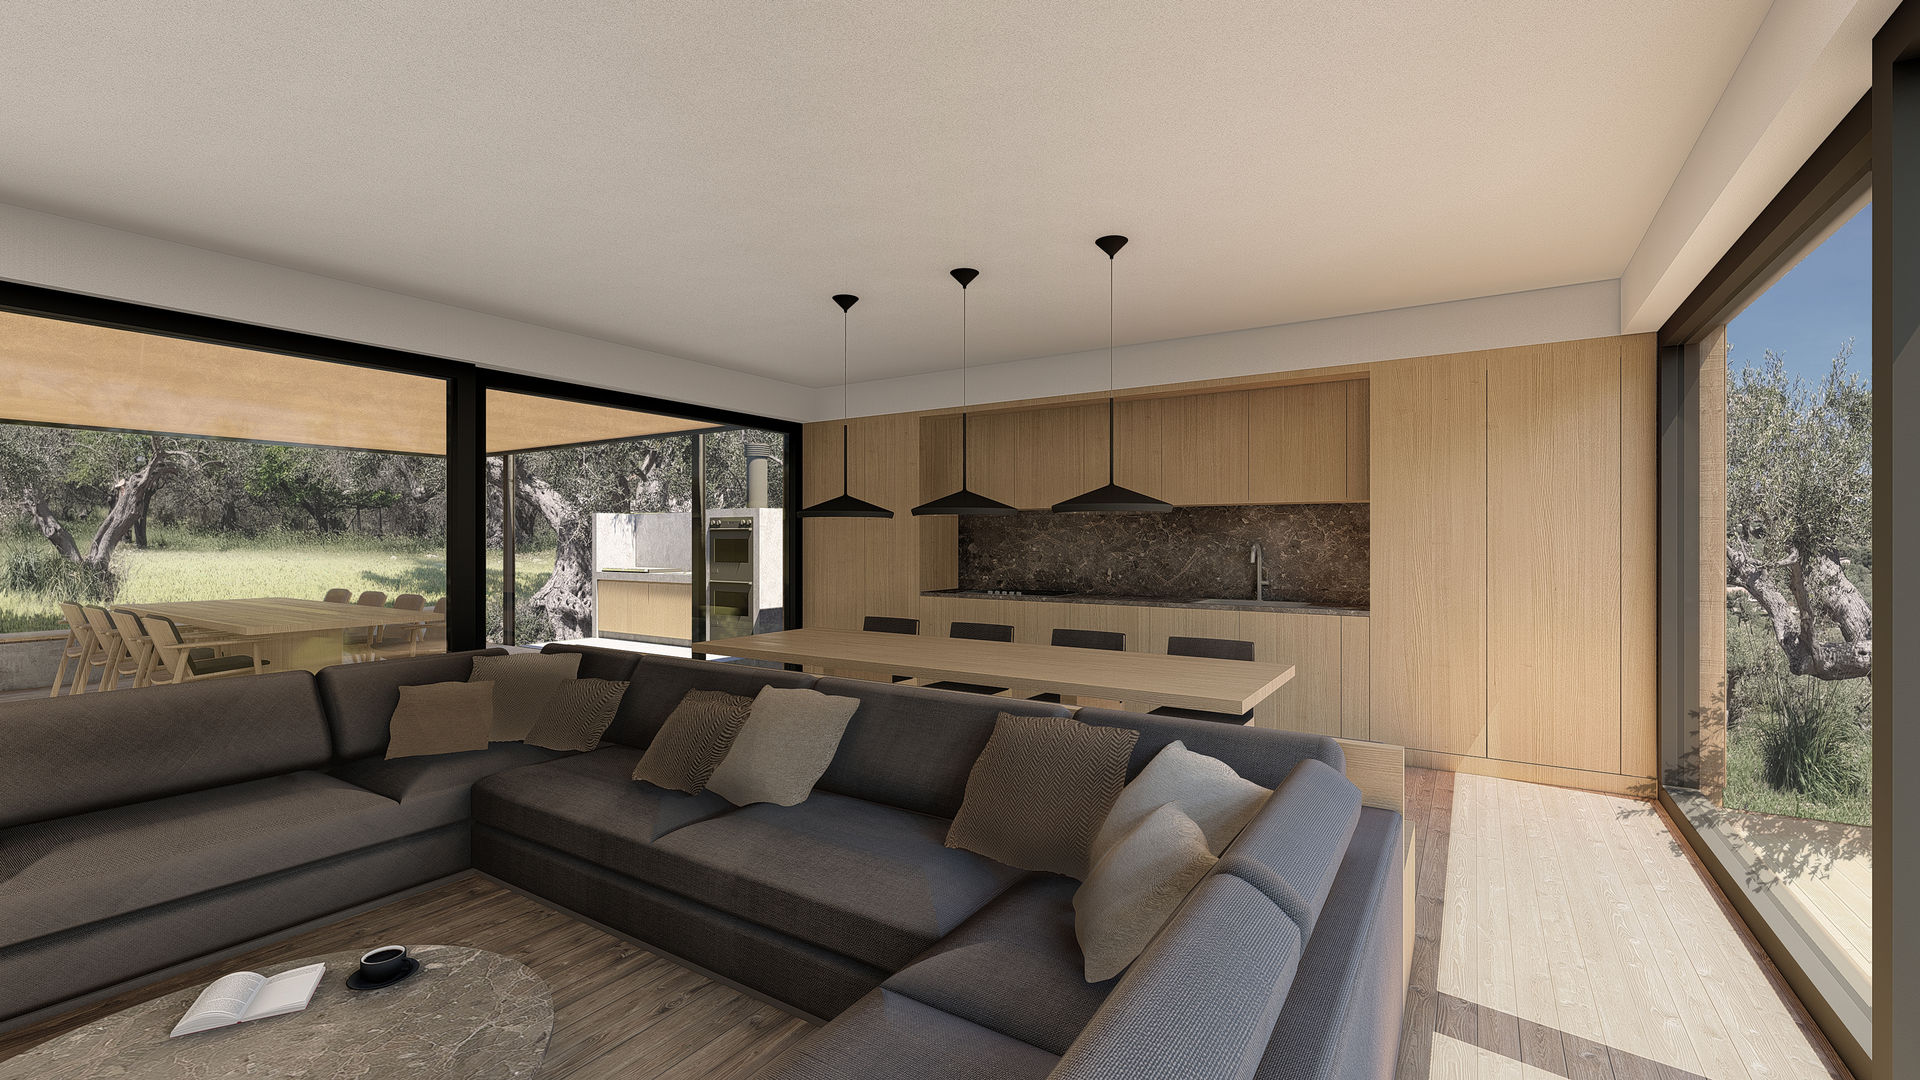 WOODEN HOUSE G|C – SICILY, ALESSIO LO BELLO ARCHITETTO a Palermo ALESSIO LO BELLO ARCHITETTO a Palermo Dapur built in Kayu Wood effect durmast kitchen, wooden table, table lamps, couch, olive tree grove, wooden house, country house